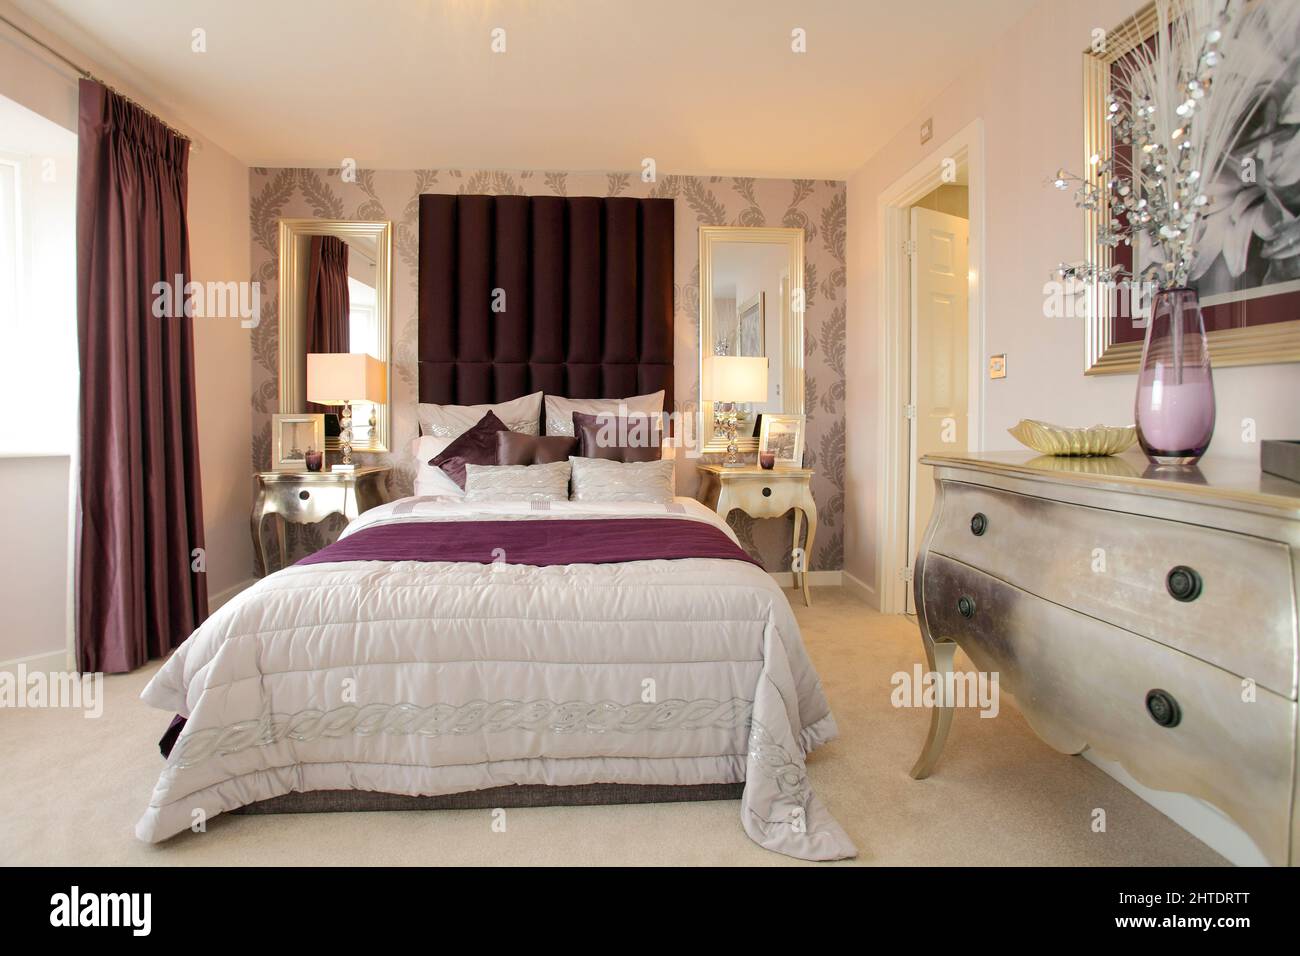 Modern bedroom in new build home,bedspread,purple burgundy deep red colour scheme,tall padded feature headboard,silver dressing table. Stock Photo